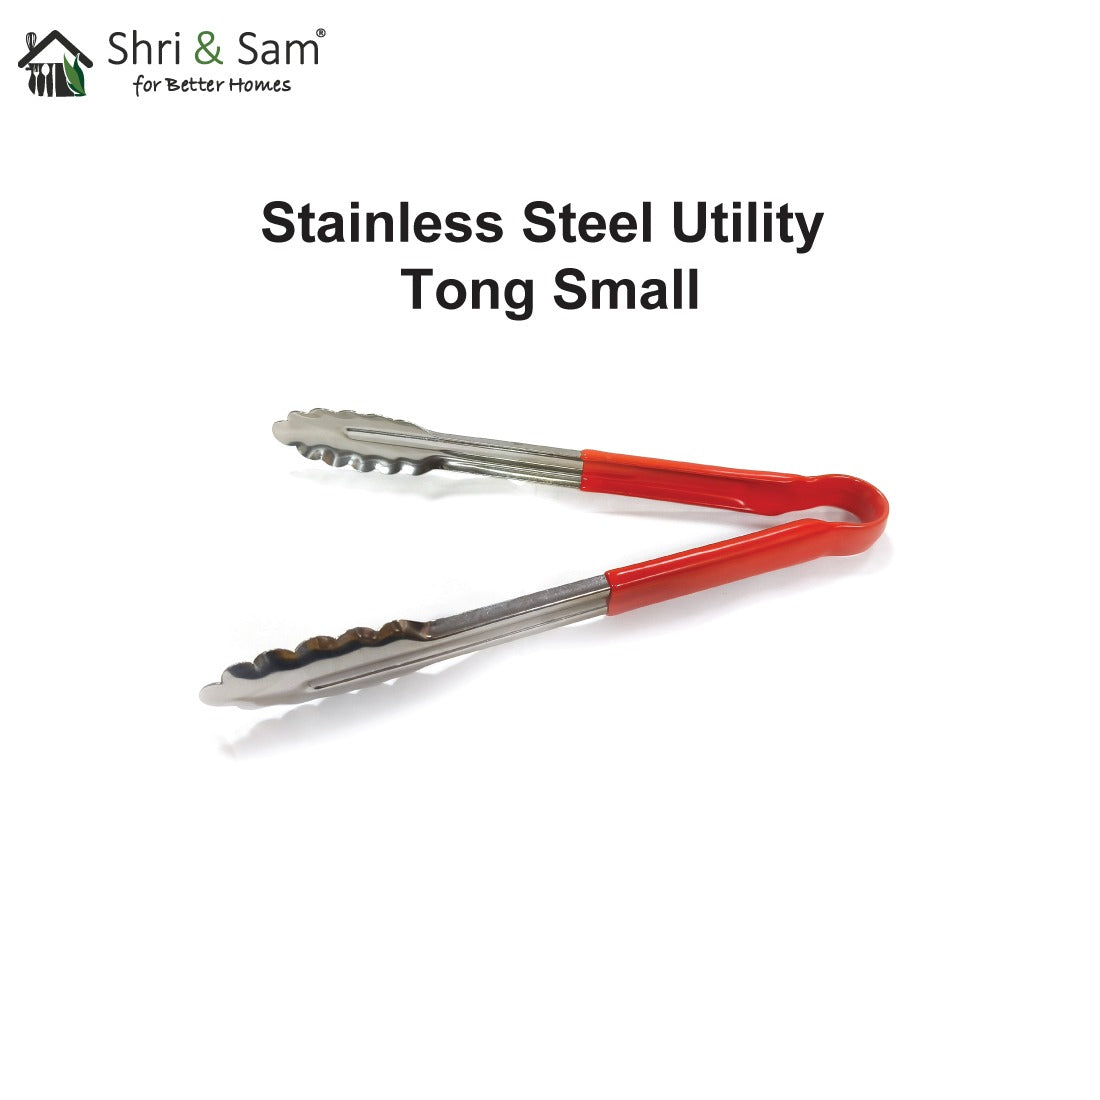 Stainless Steel Utility Tong Small